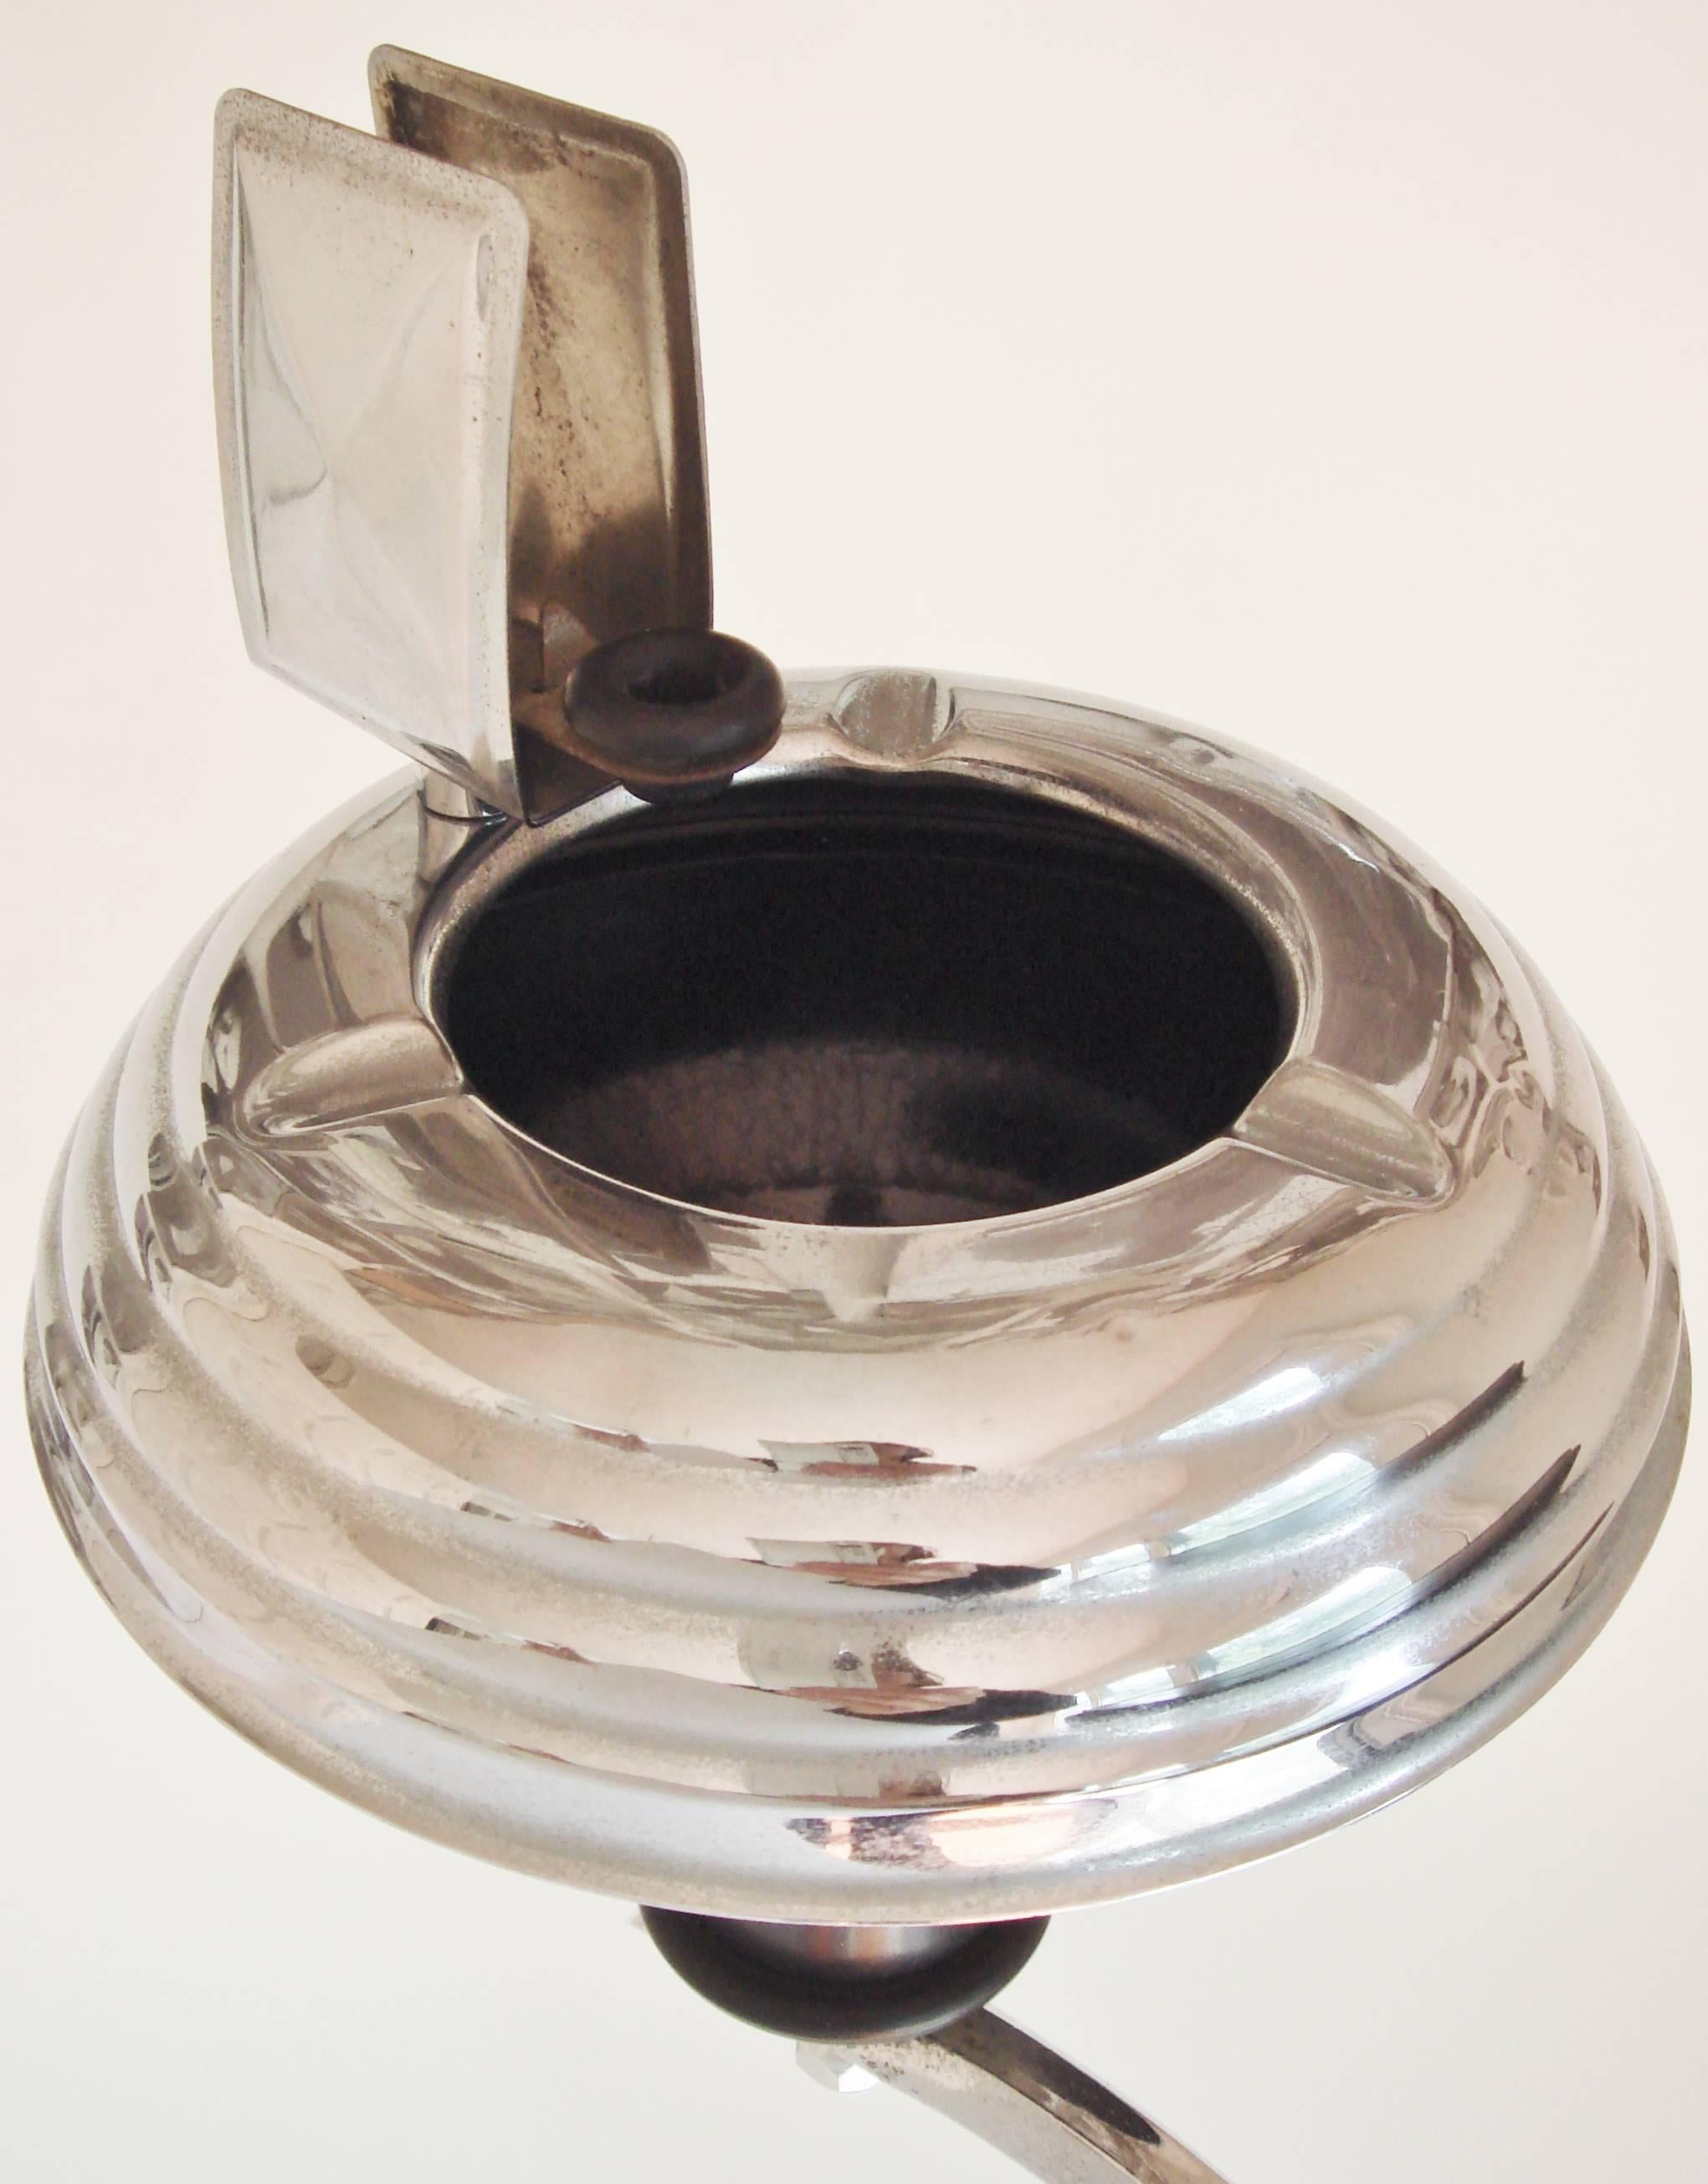 This stylish Art Deco combination smoker's table, ashtray, matchbook holder and cigarette stubber was manufactured by Arrow Metal Products of Australia. It features a ribbed circular chrome cushion base with a black knop that supports two chrome